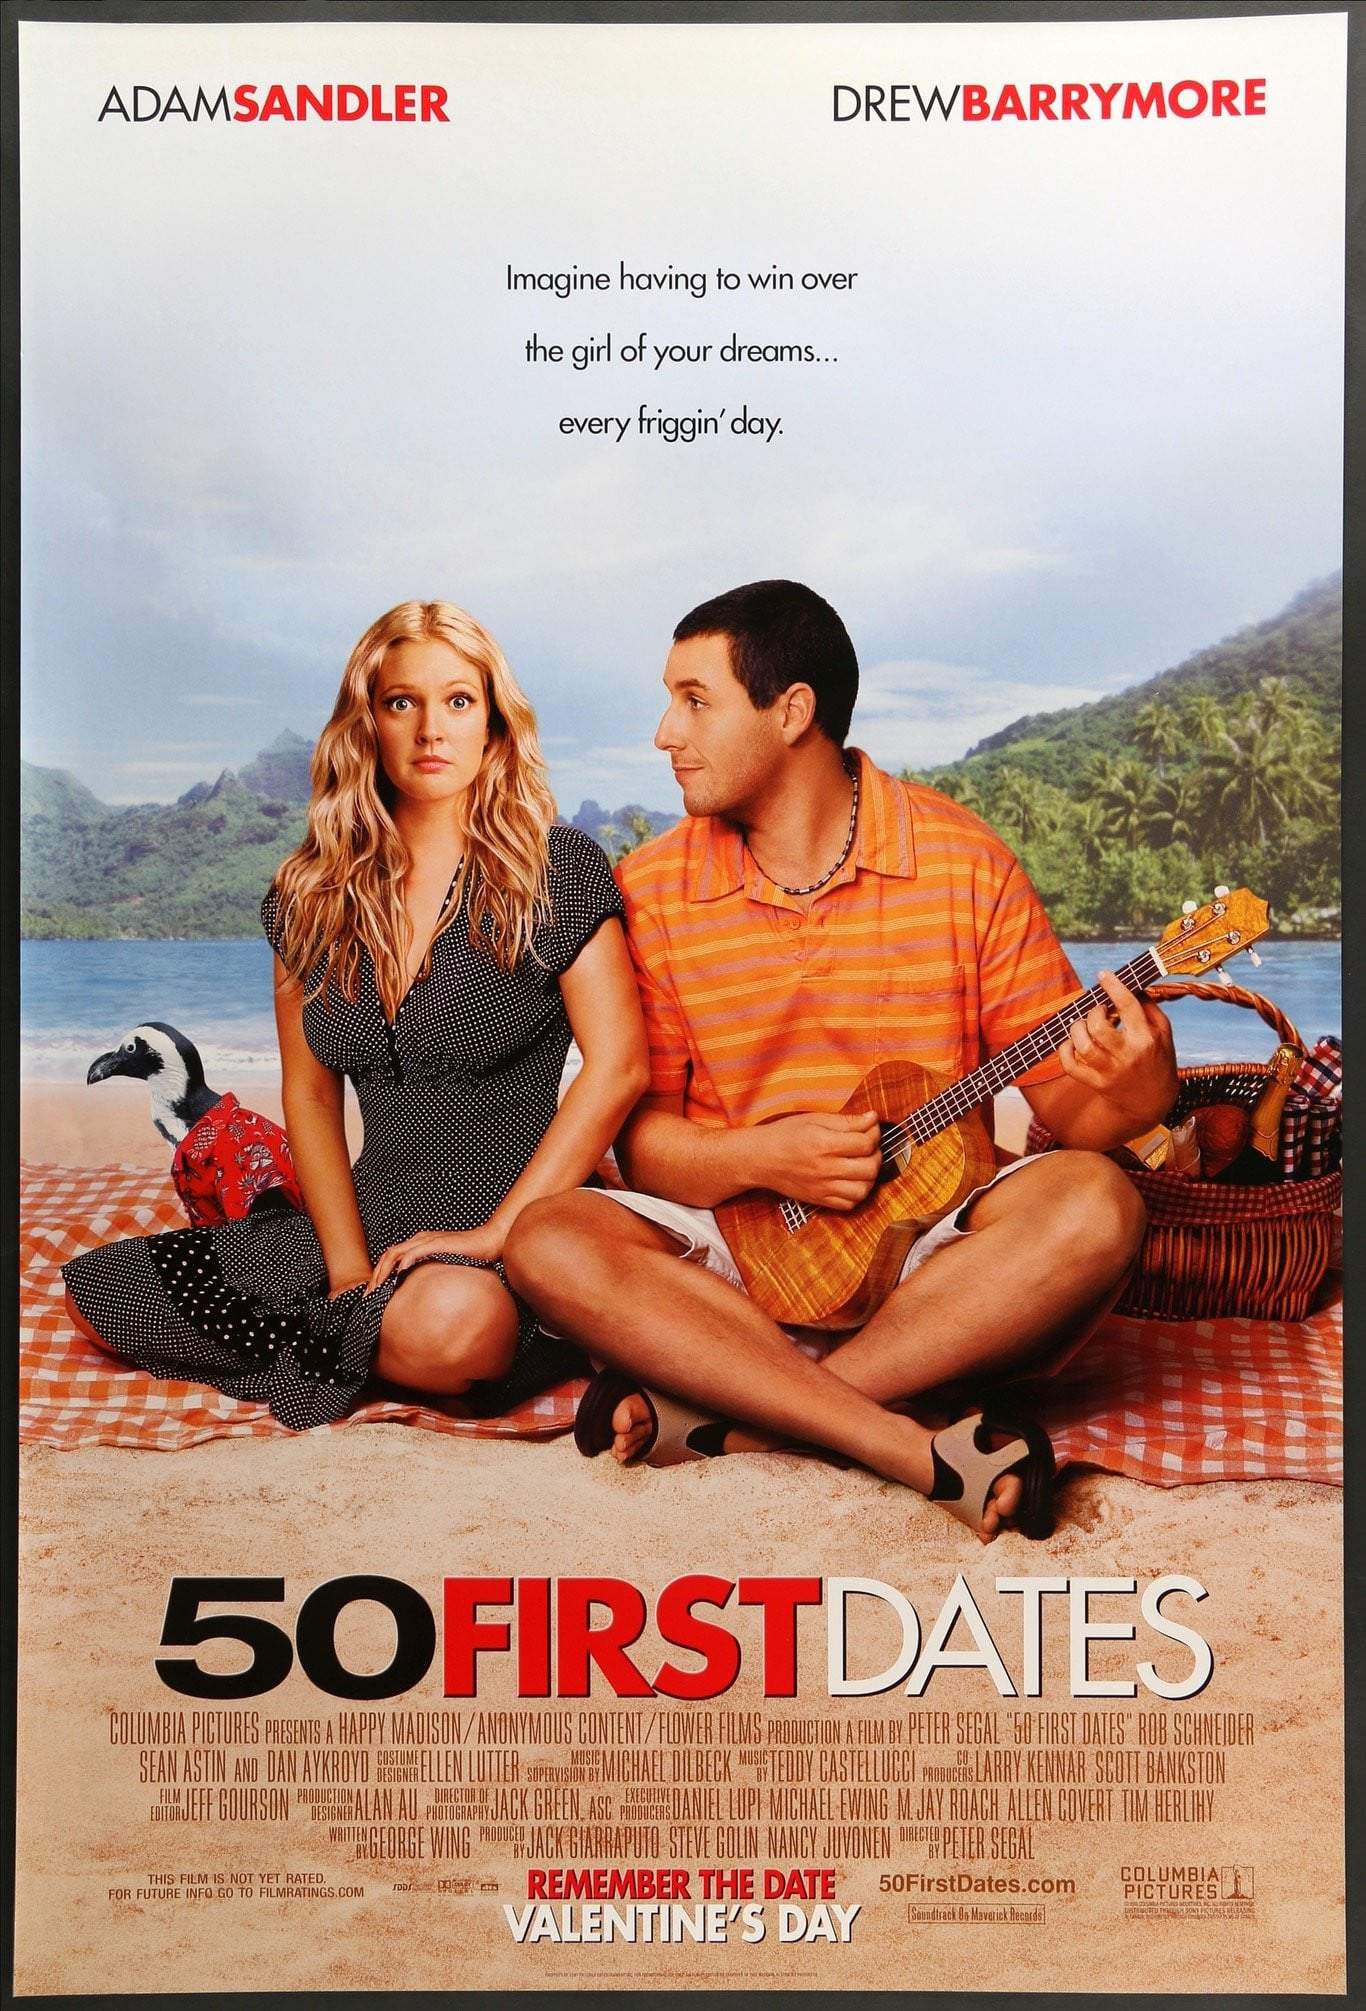 50 first dates movie rating